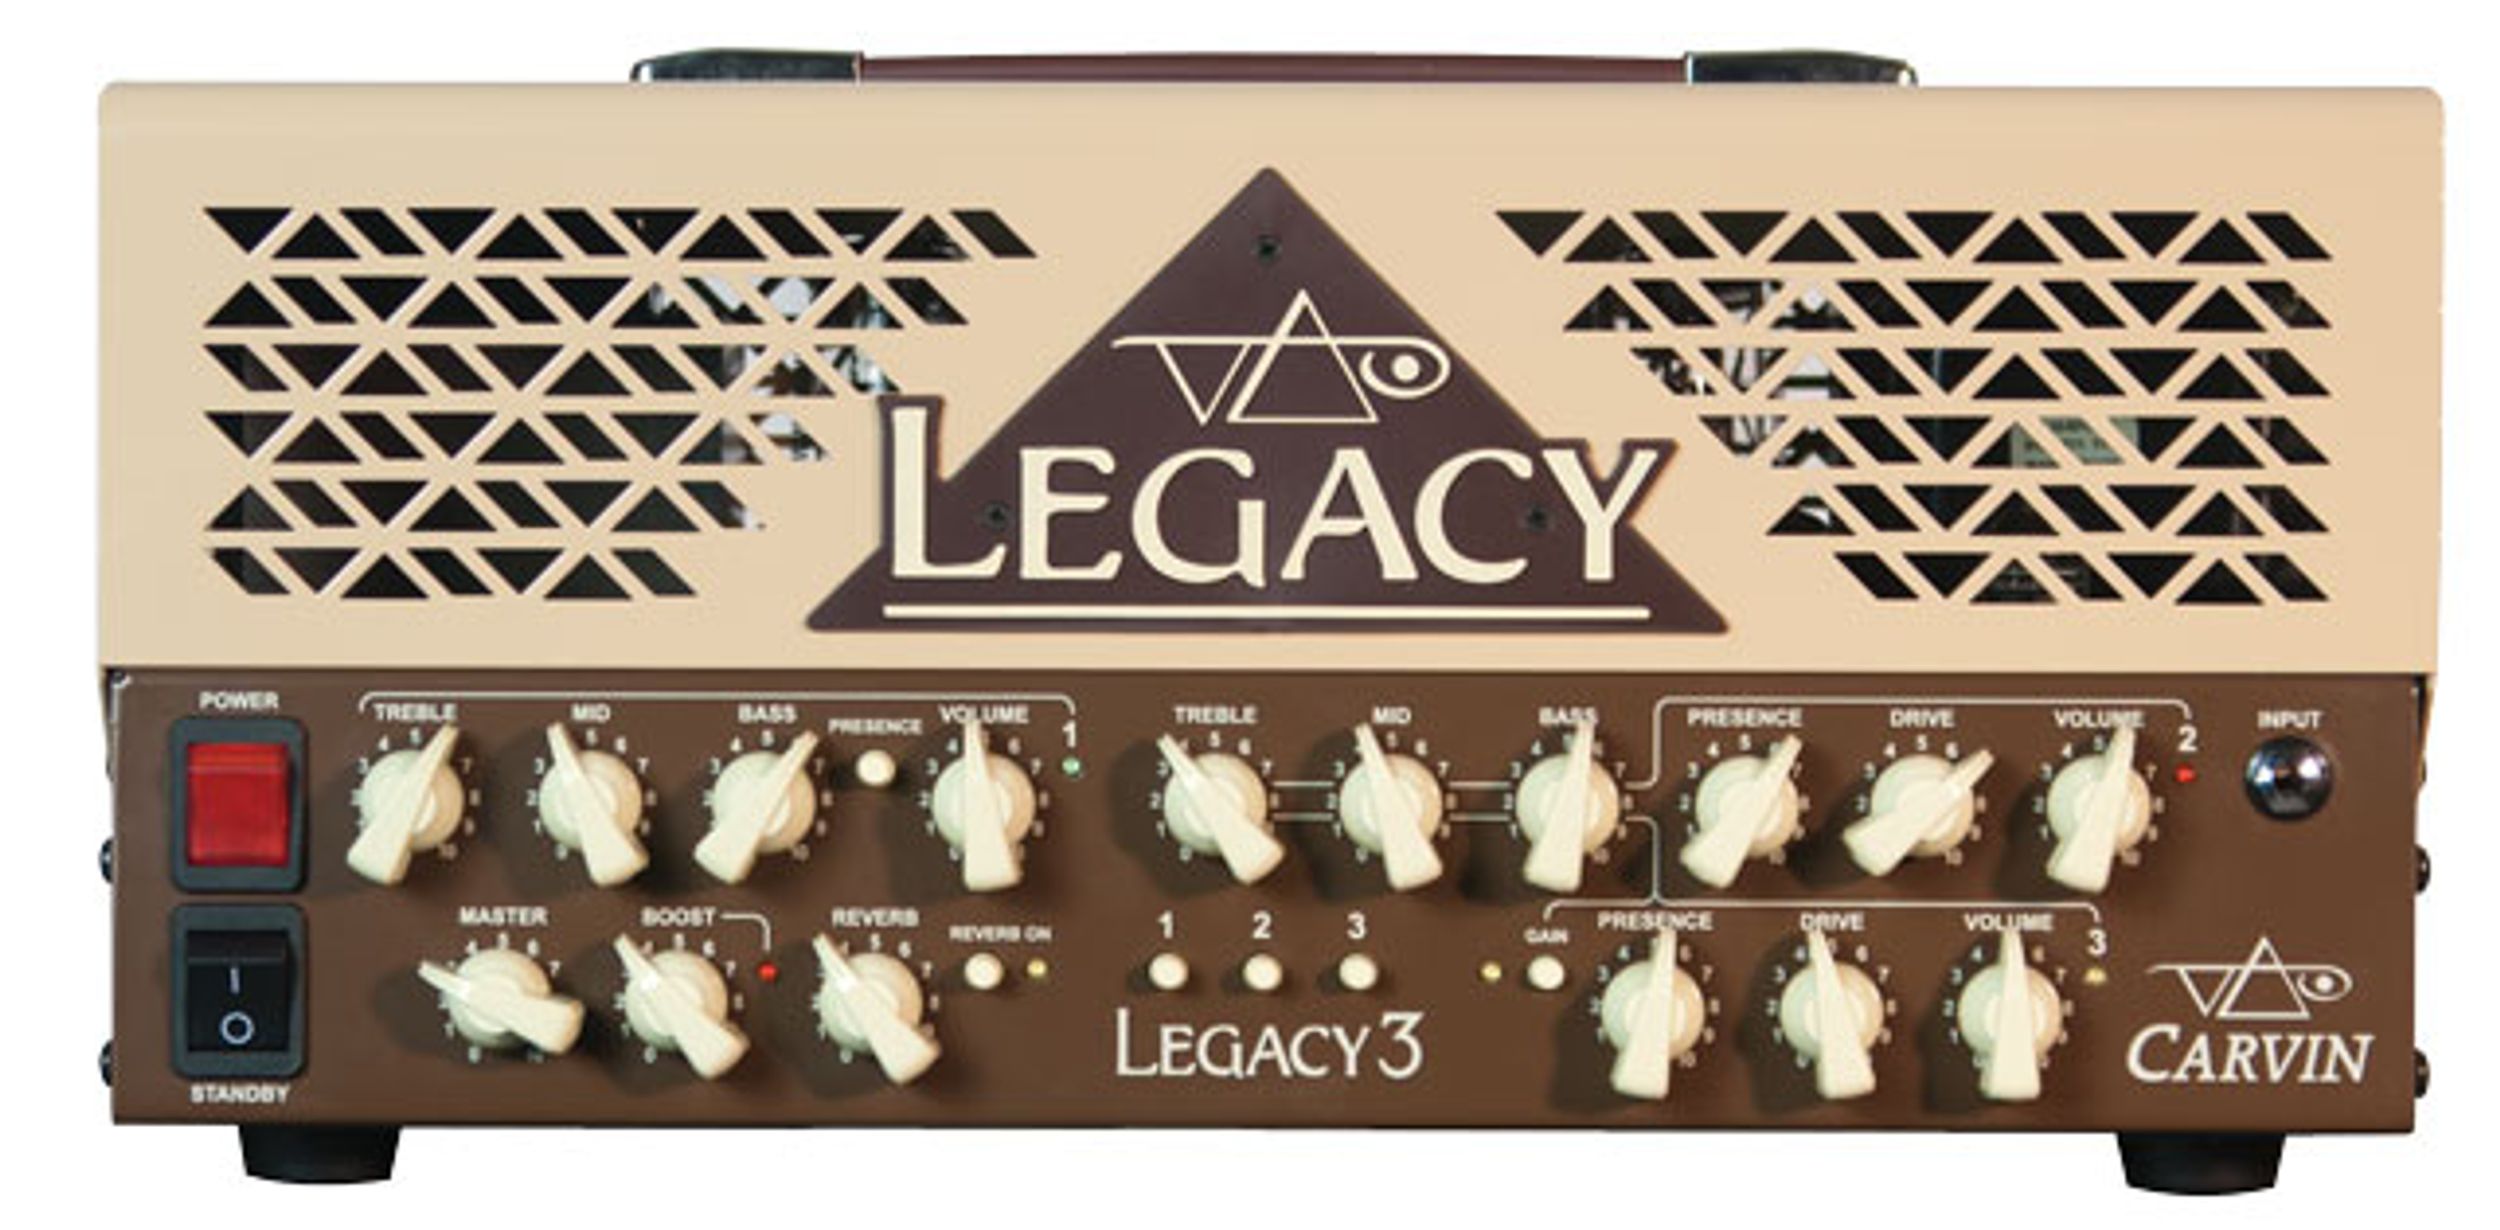 Carvin VL300 Legacy 3 Amp Review